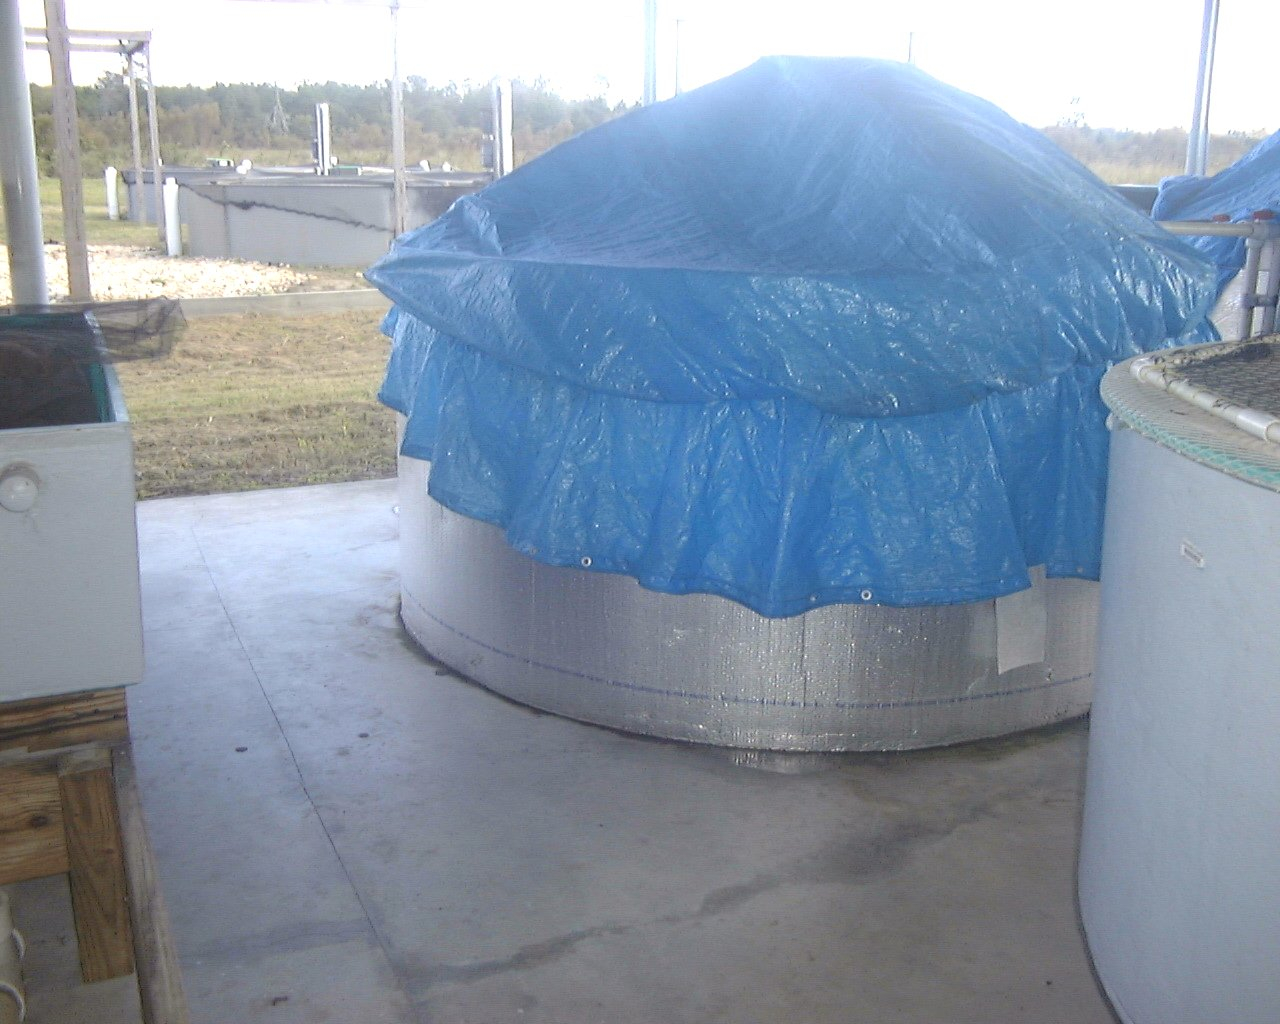 Circular tank at the Institute of Food and Agricultural Sciences aquaculturelaboratory is covered to maintain temperature during Florida's wintermonths